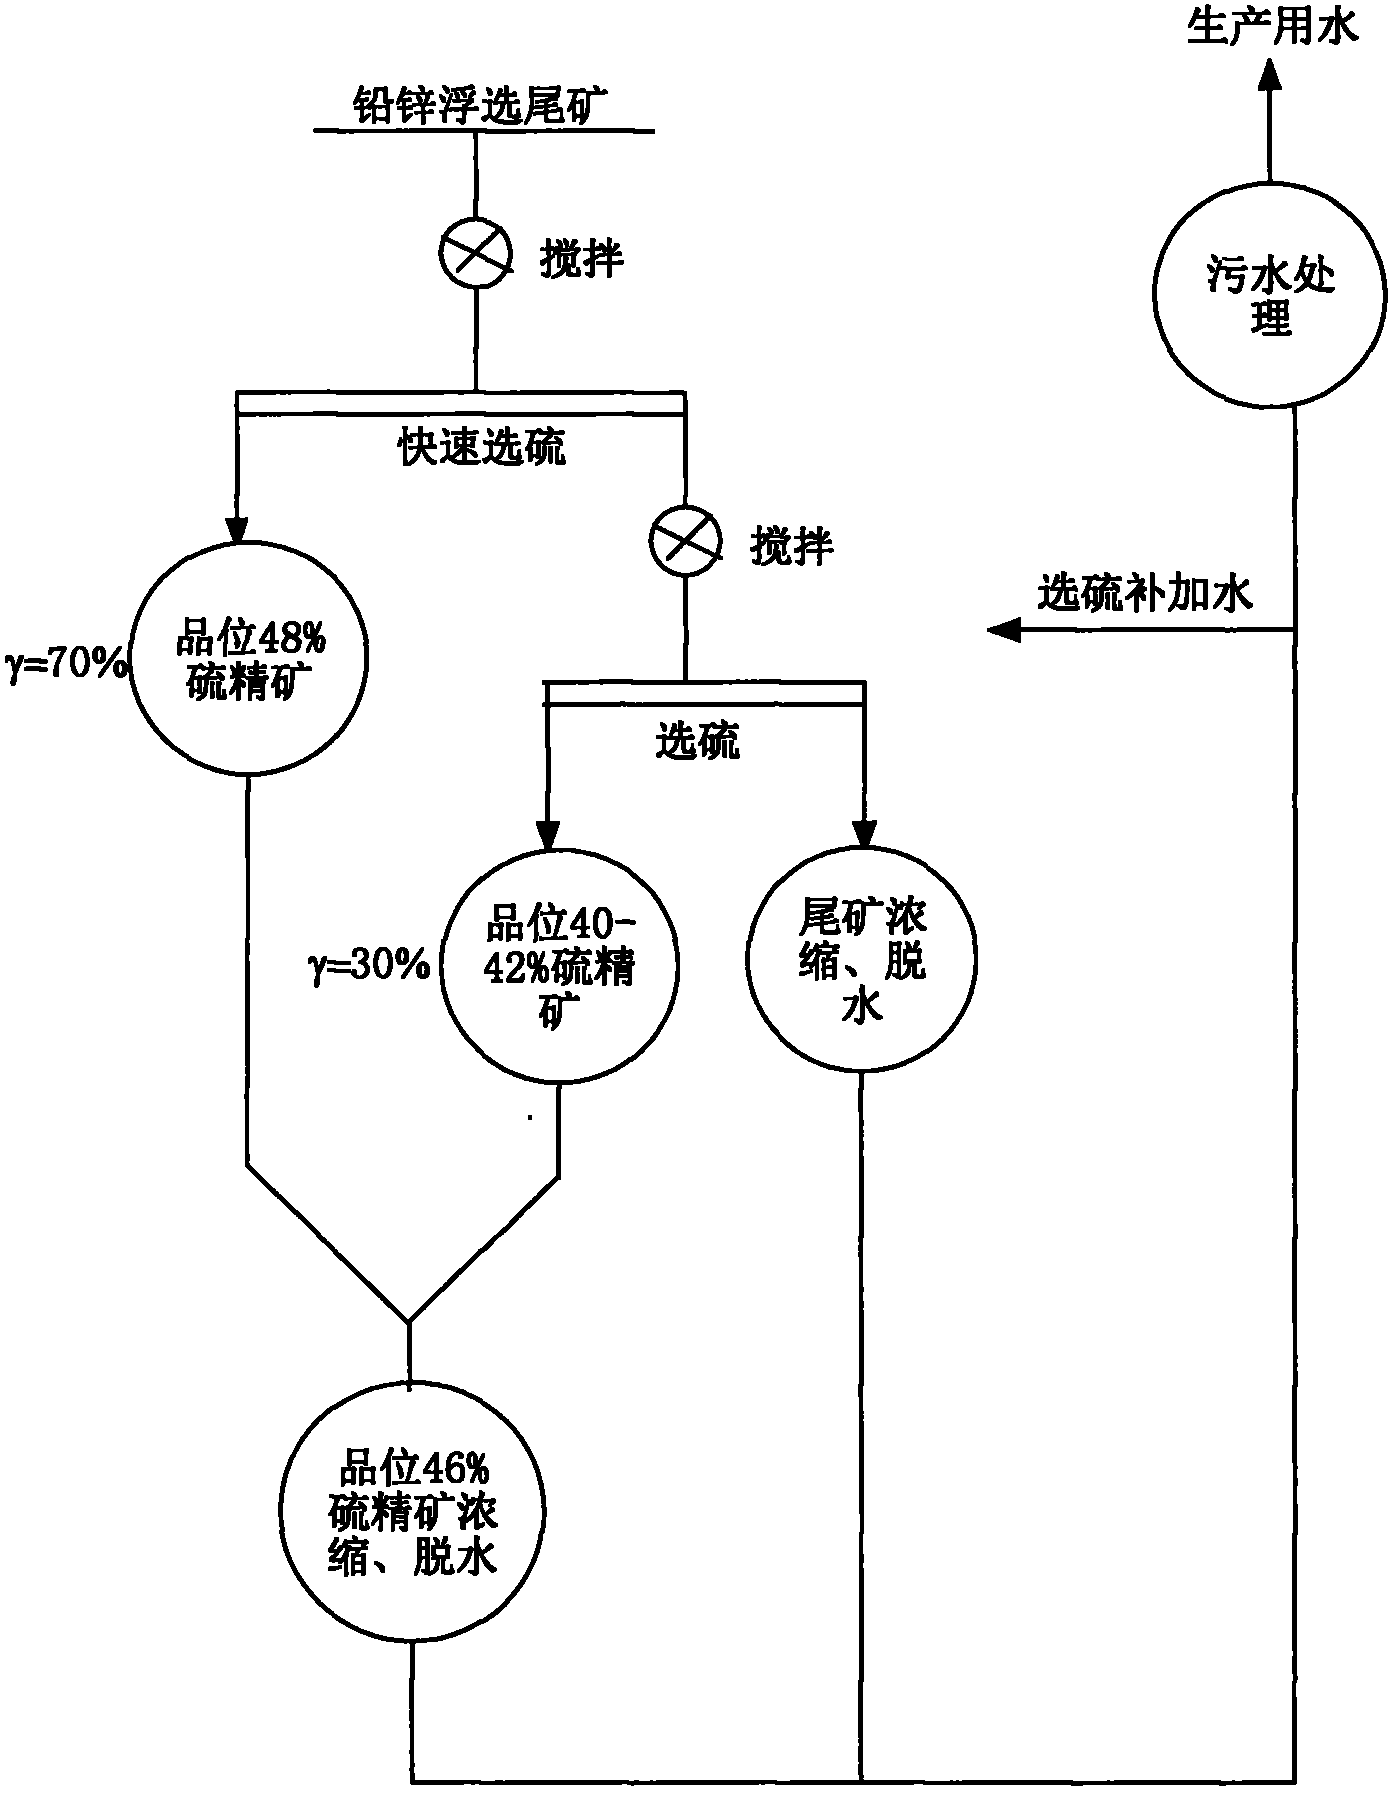 Method for floating high-grade sulfur concentrate from lead-zinc tailings by flow separation and speed division method